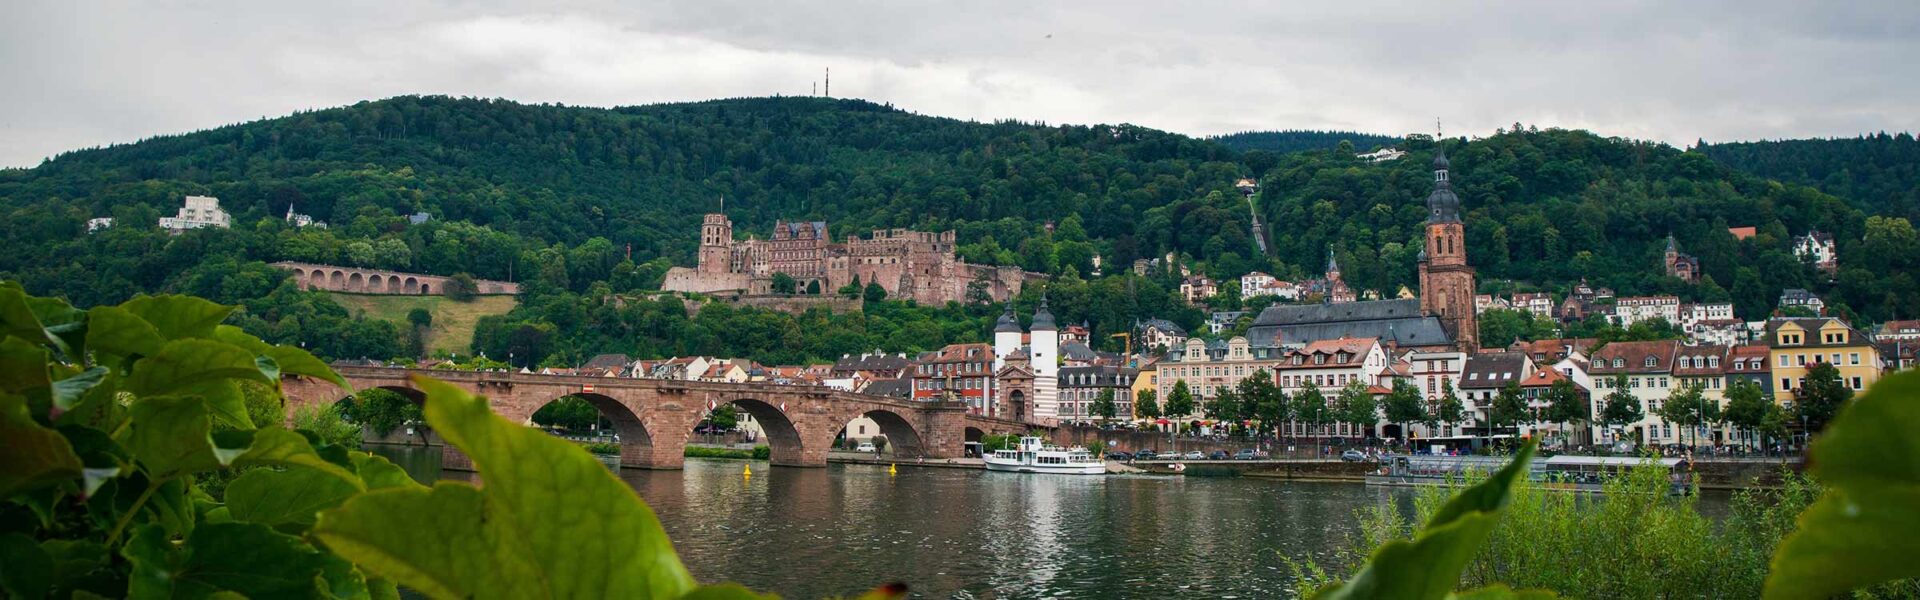 View overlooking Heidelberg Germany from across the river, with a castle in the background.